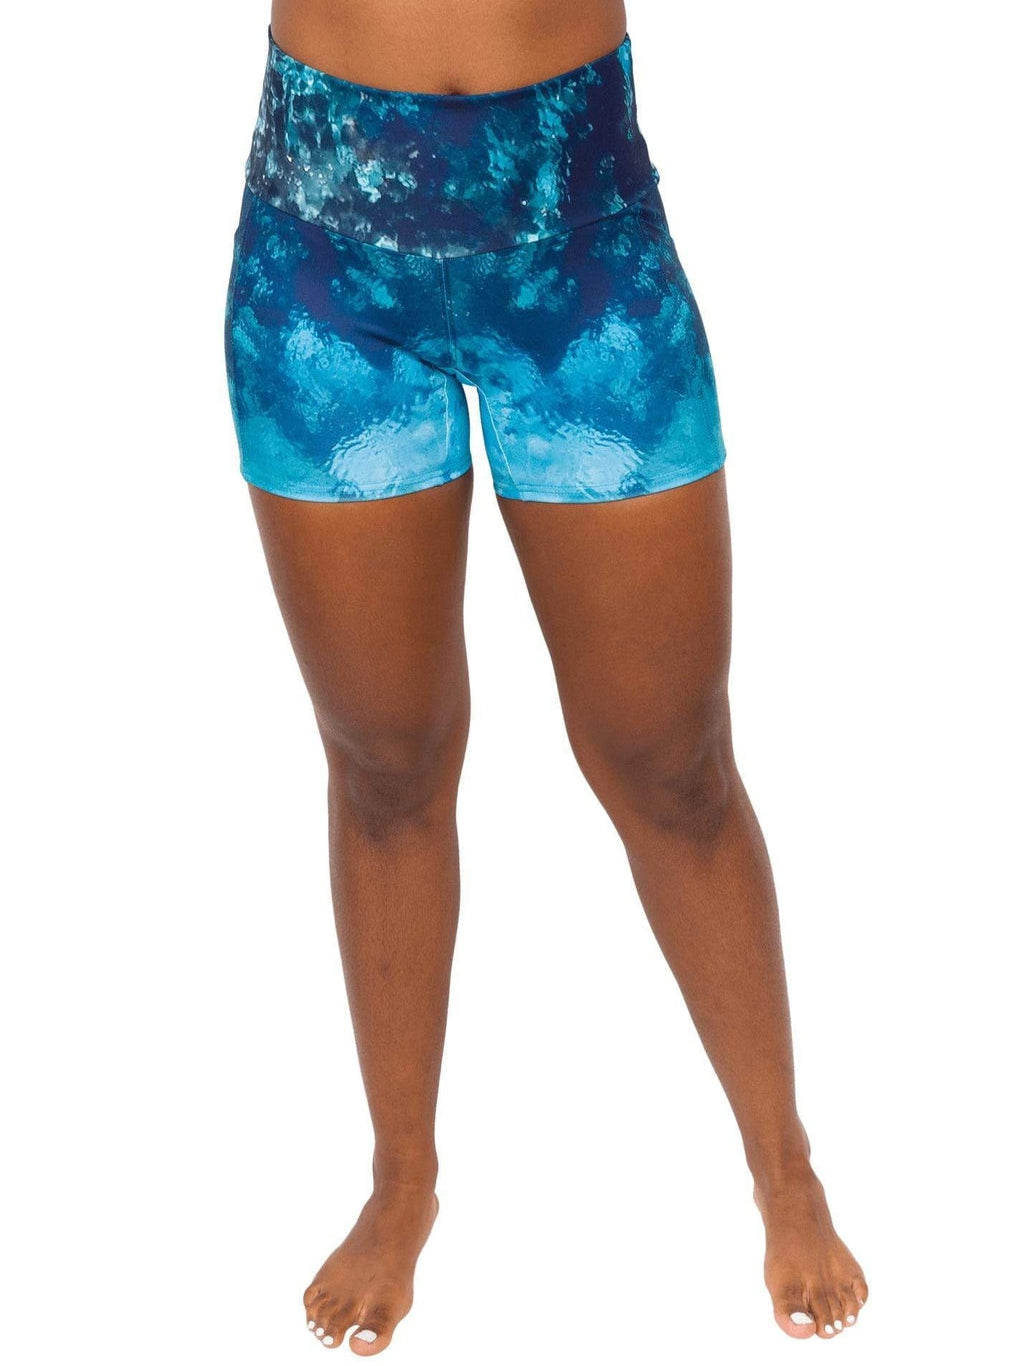 Model: Carlee is a shark &amp; sea turtle scientist and co-founder of Minorities in Shark Sciences. She is 5&#39;7&quot;, 145 lbs and is wearing a M short.